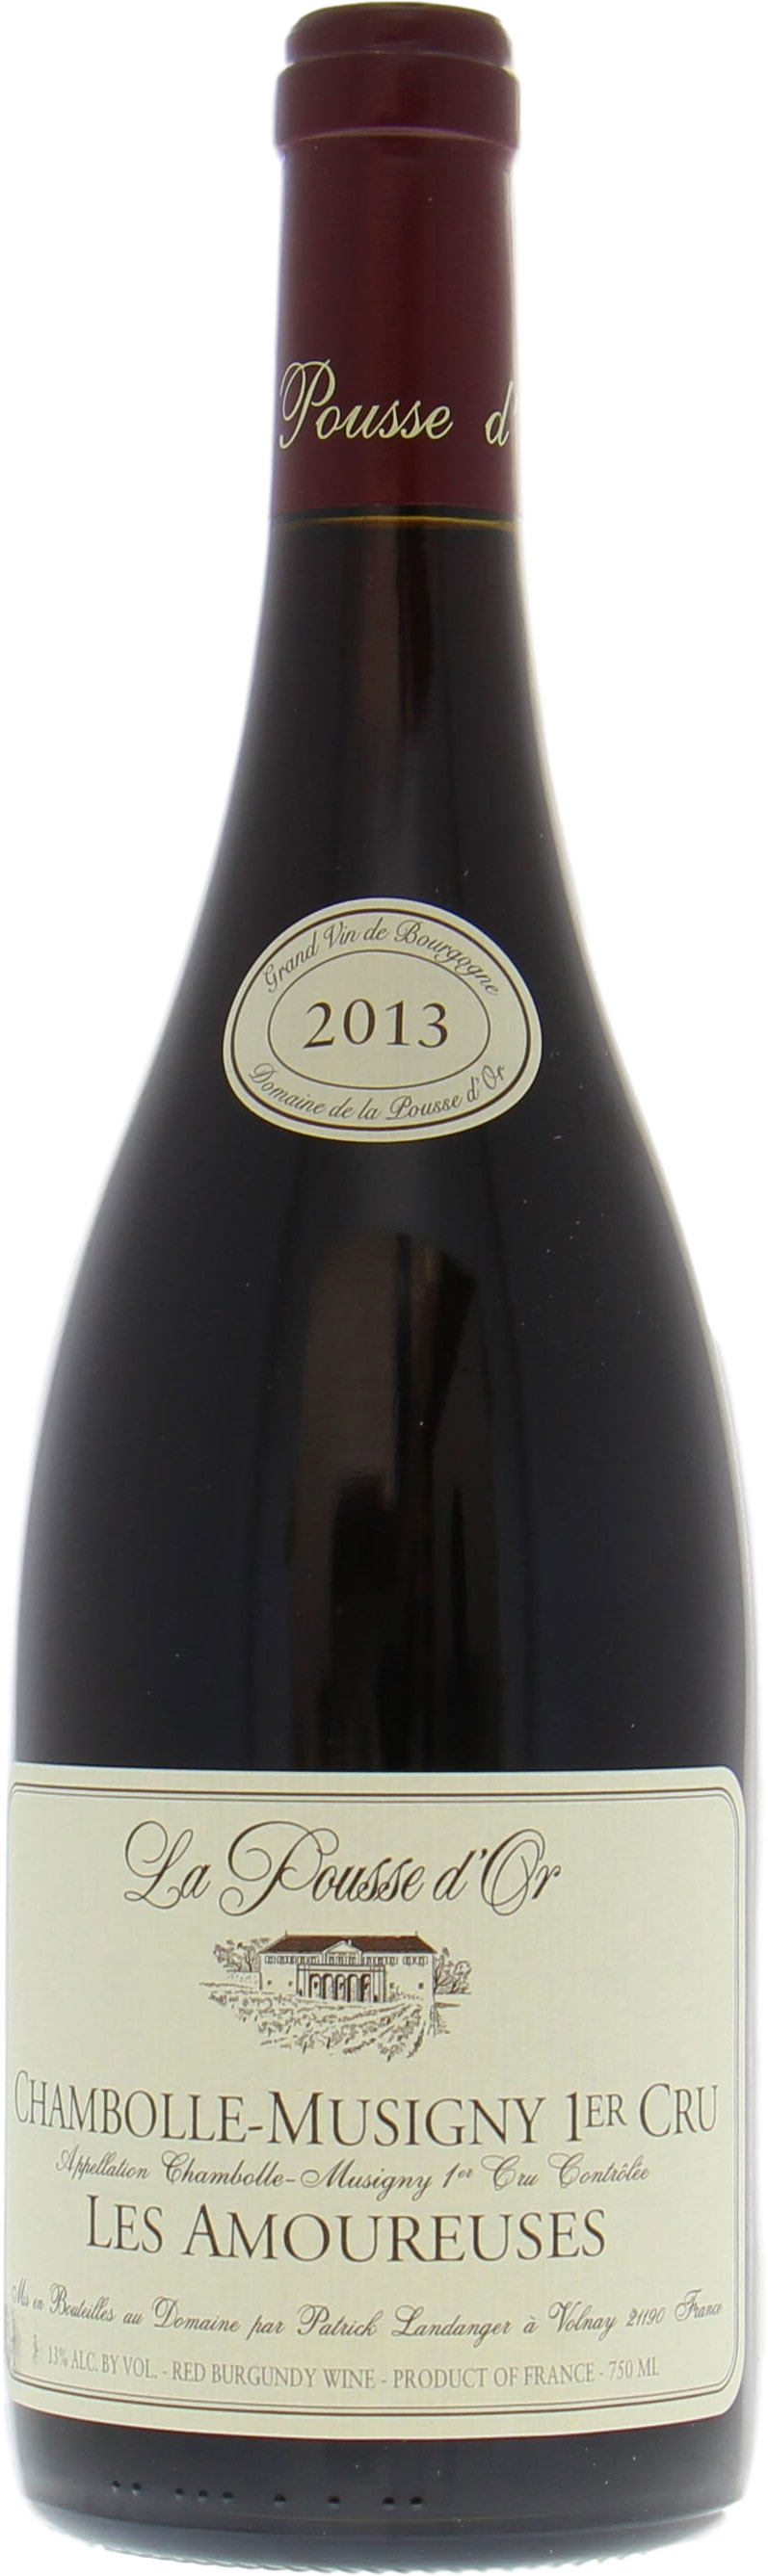 La Pousse D'Or - Chambolle Musigny 1er cru Les Amoureuses 2013 From Original Wooden Case